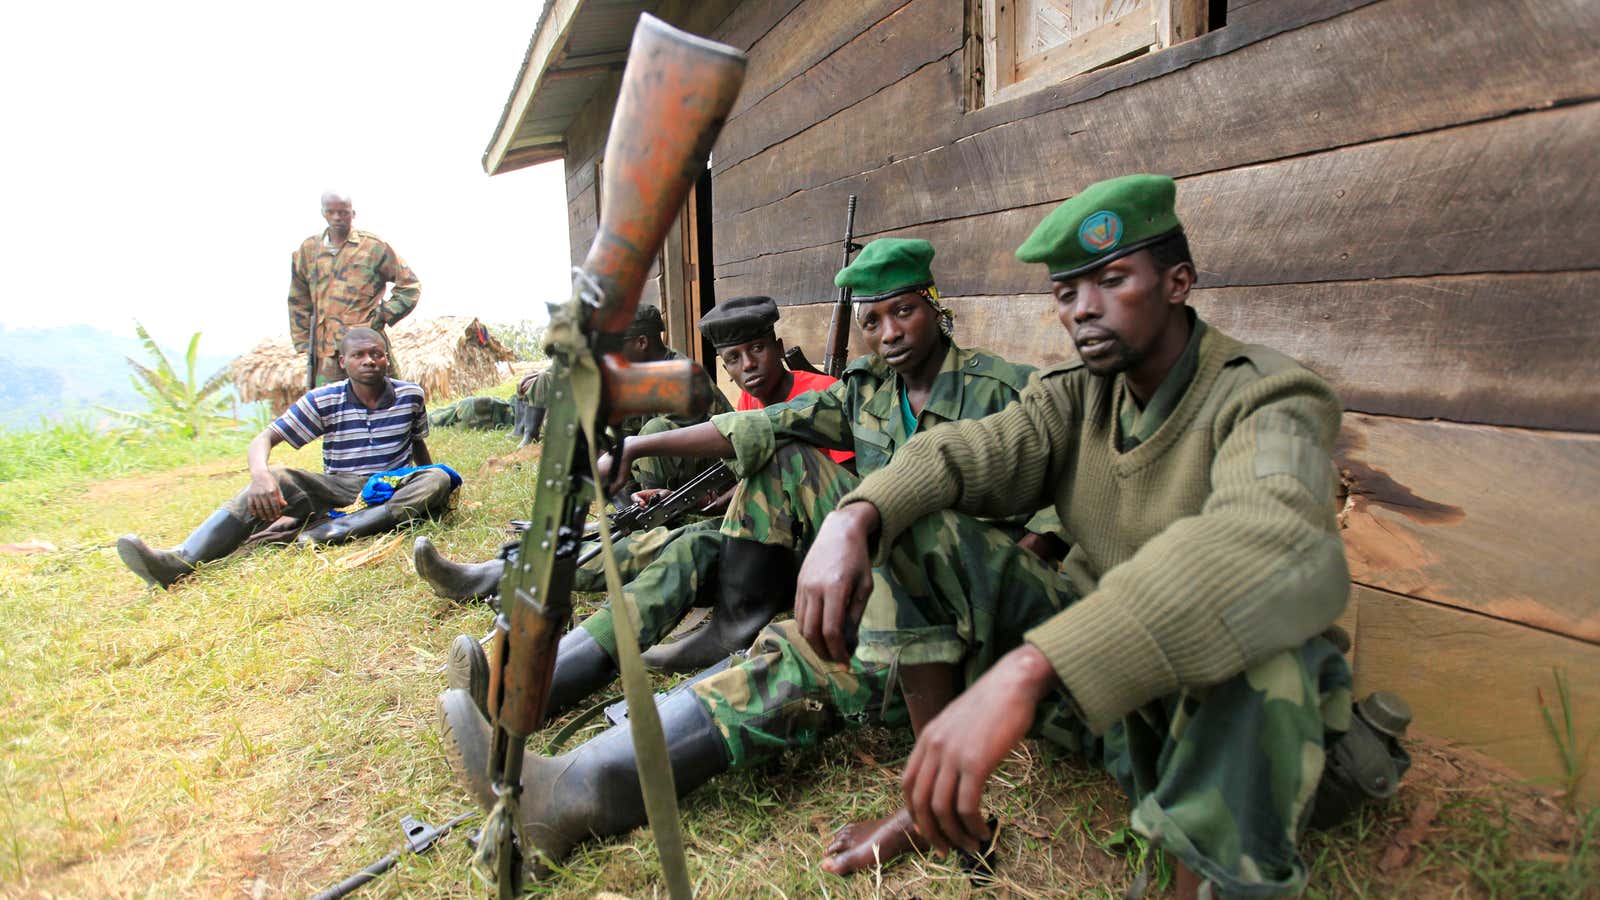 The M23 rebel group claims to defend the interests of Congolese Tutsis.